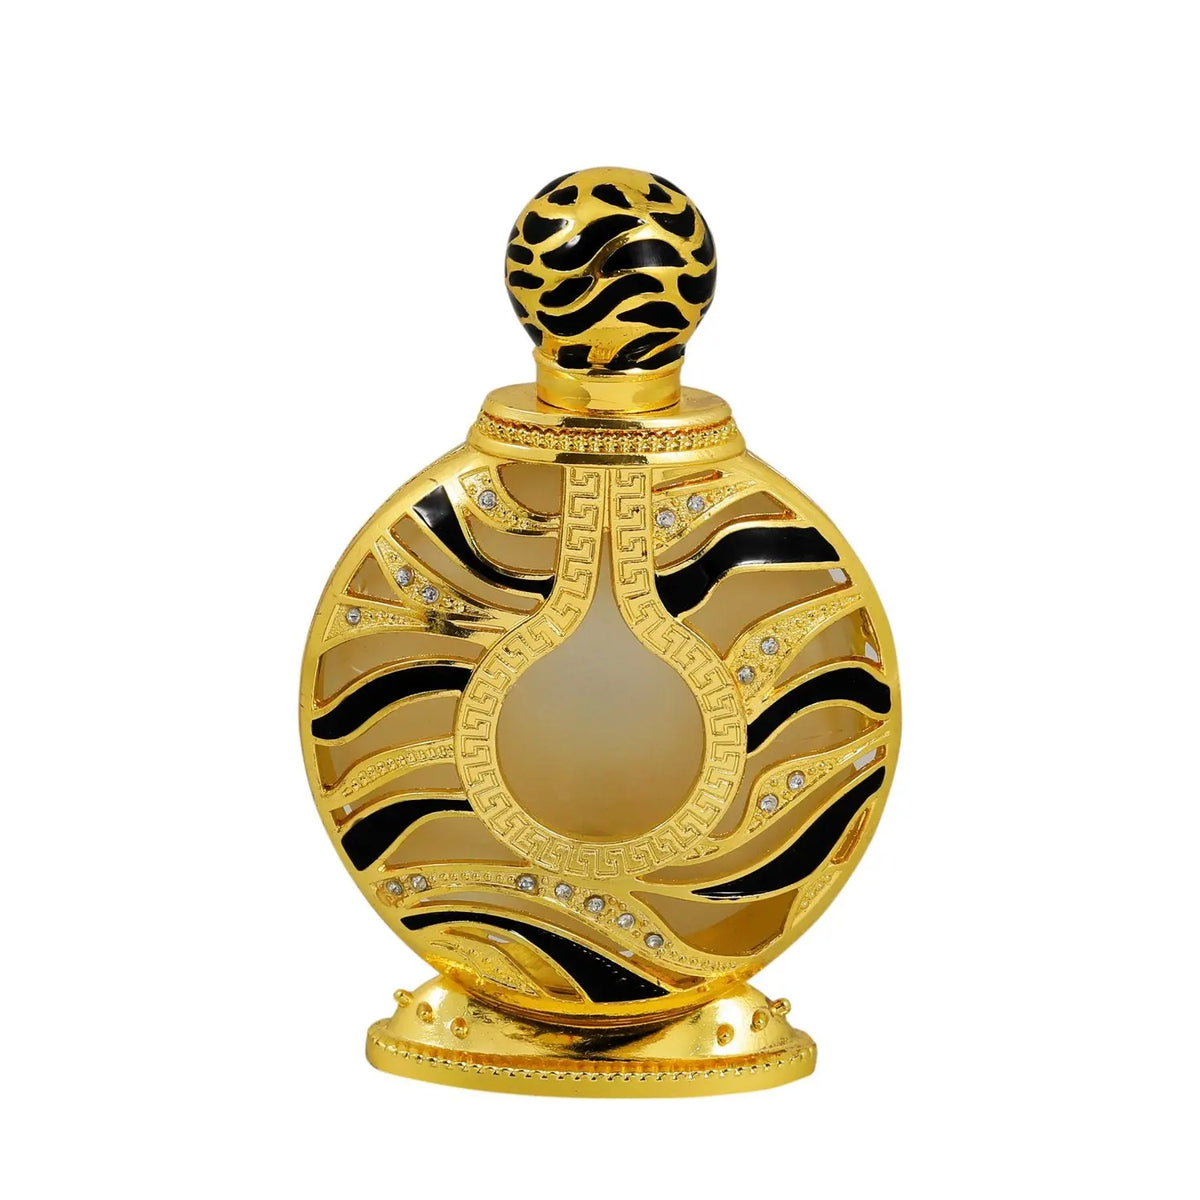 The image displays an ornate perfume bottle:  The bottle has a spherical shape with a flat base, finished in a shiny gold color. It features black and gold patterned designs with inset gem-like crystals. The central part of the bottle has a frosted glass panel. The top of the bottle has a spherical, patterned gold cap.